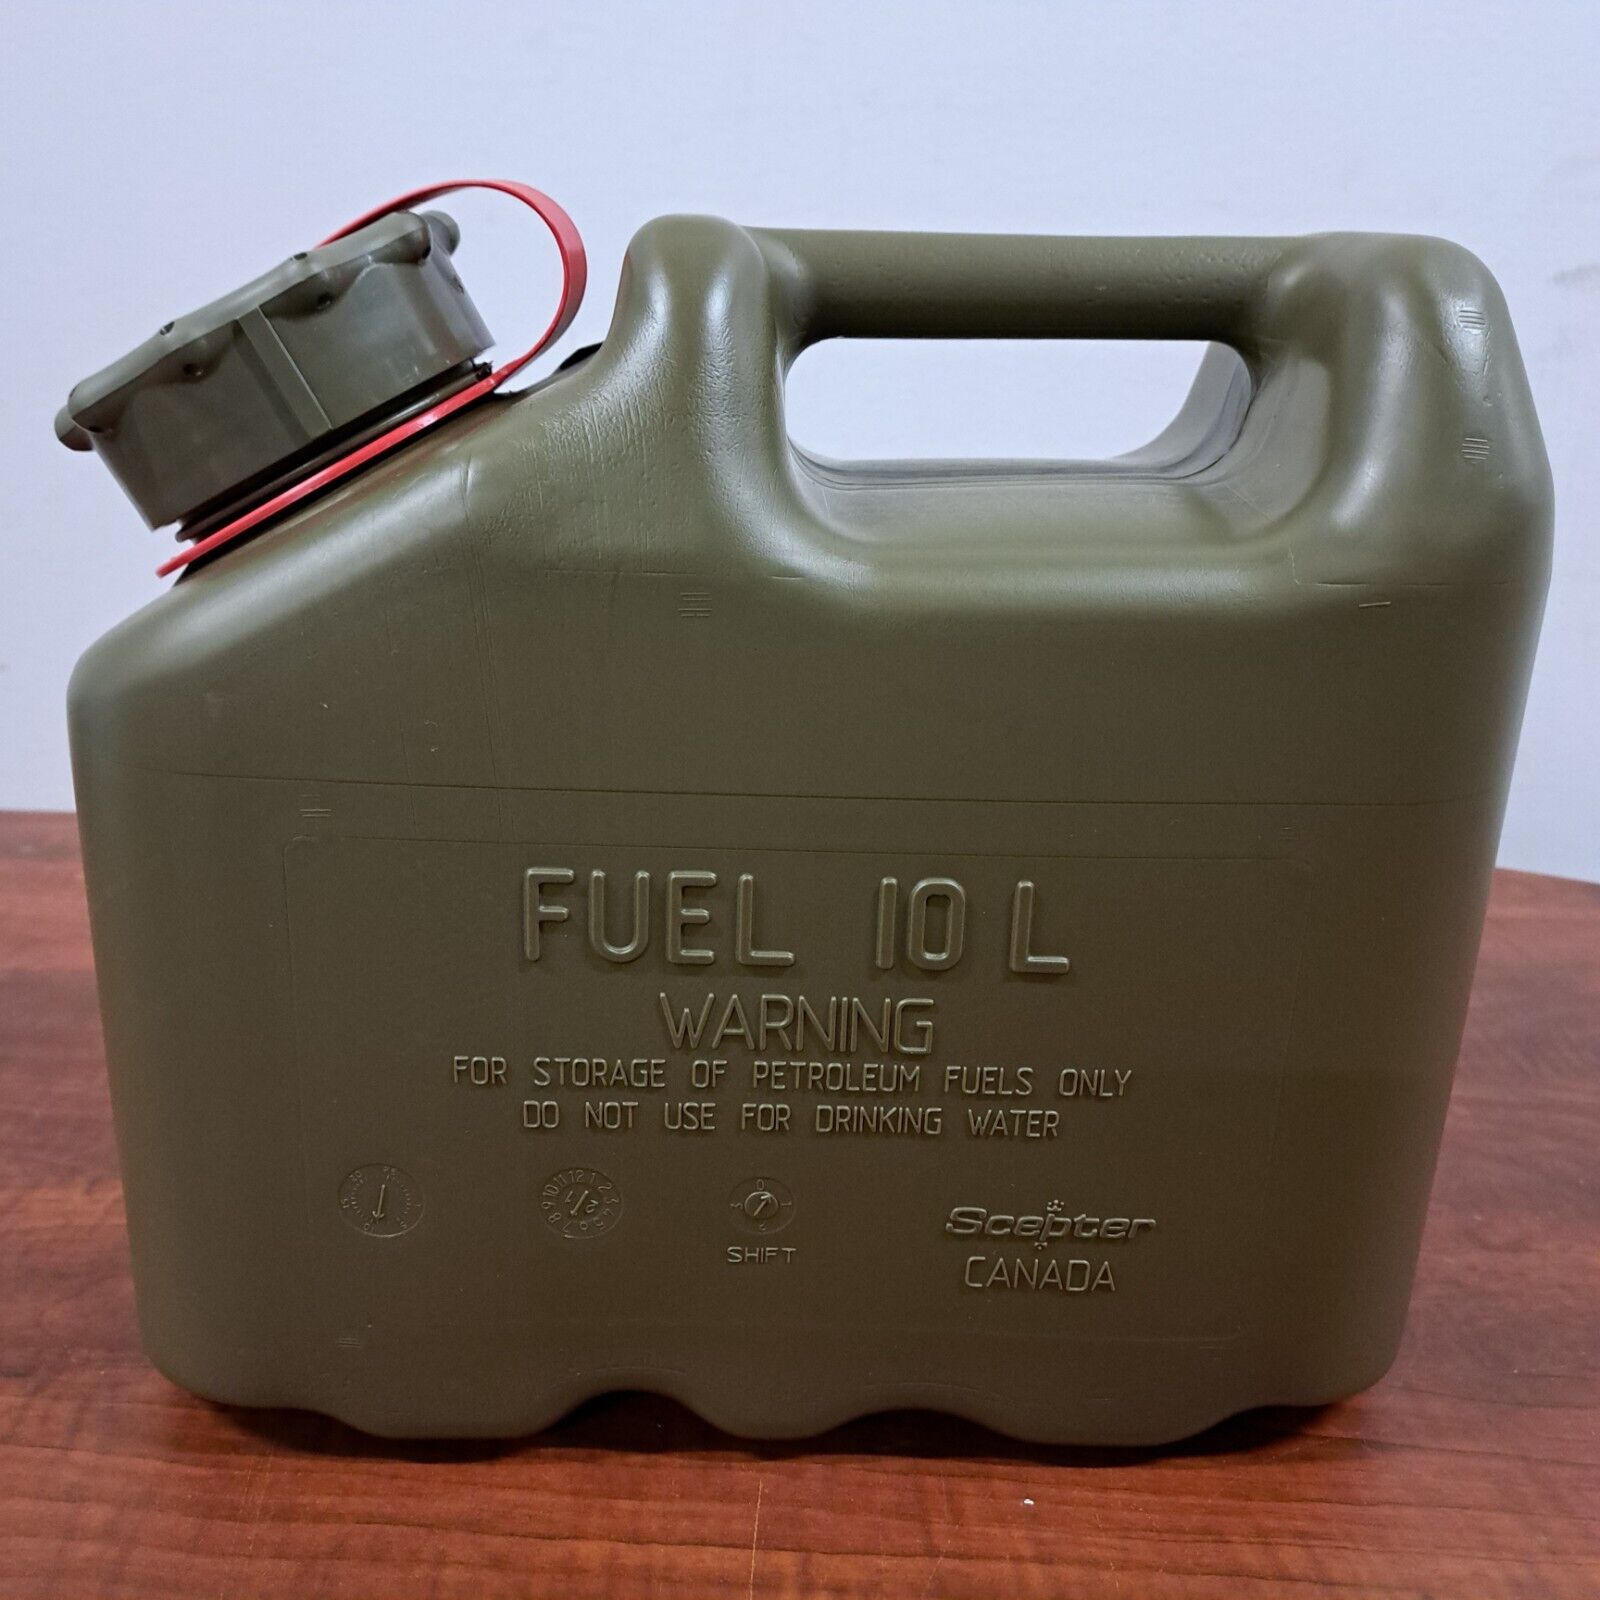 Brand New Genuine Scepter Olive Drab Military Fuel Can (MFC) 2.5 Gallon / 10 L